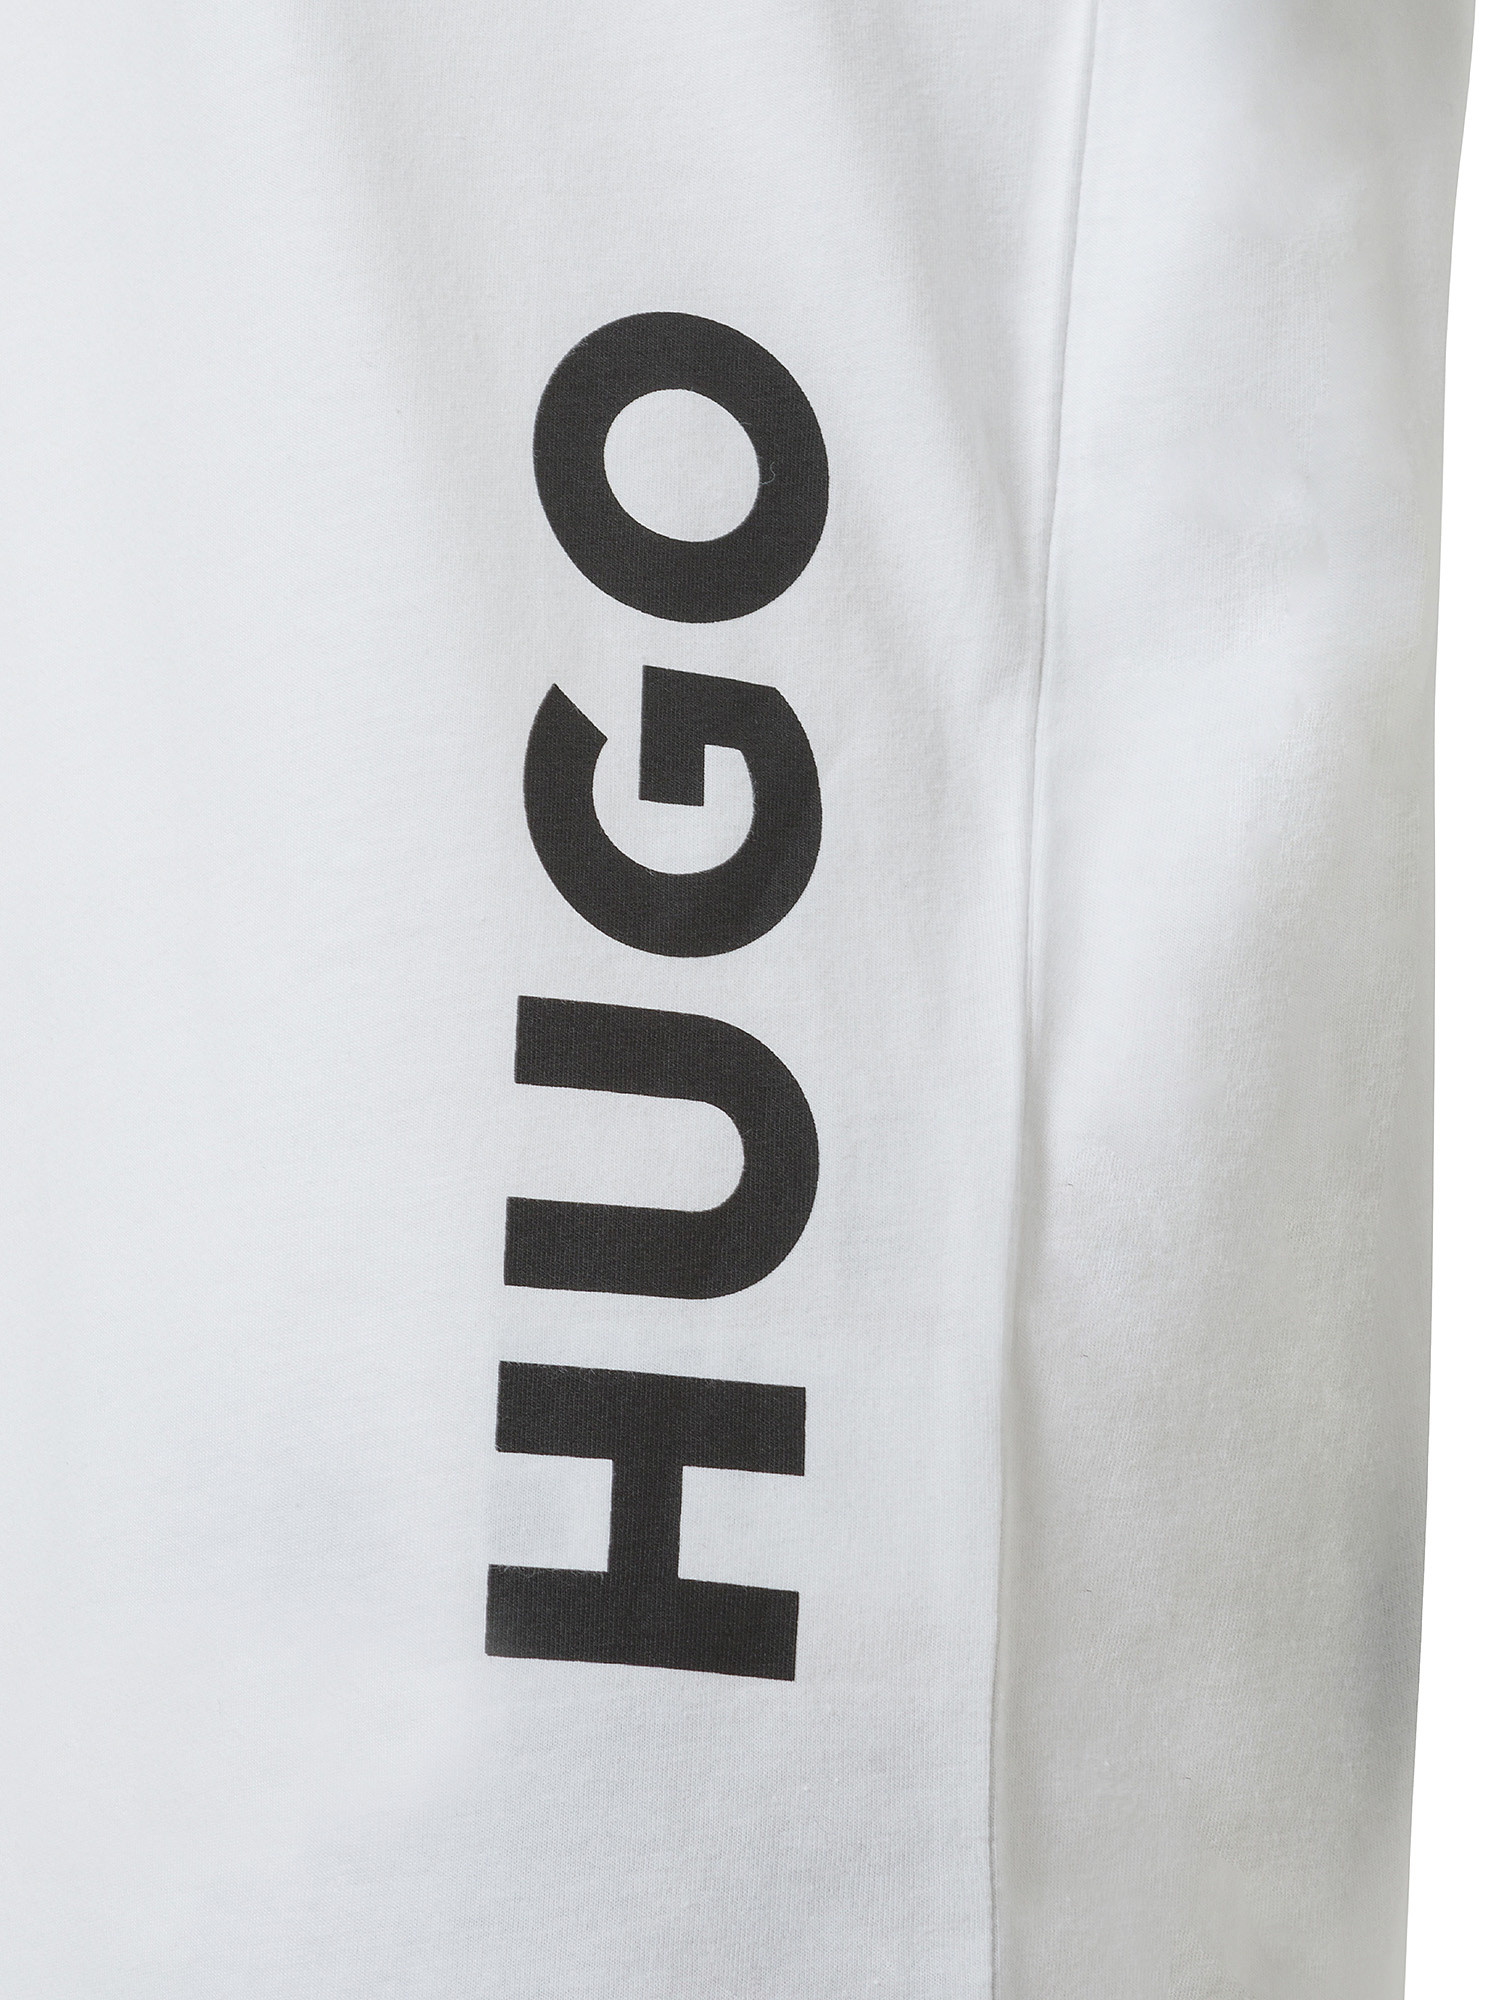 Hugo - T-shirt con stampa logo in cotone, Bianco, large image number 2